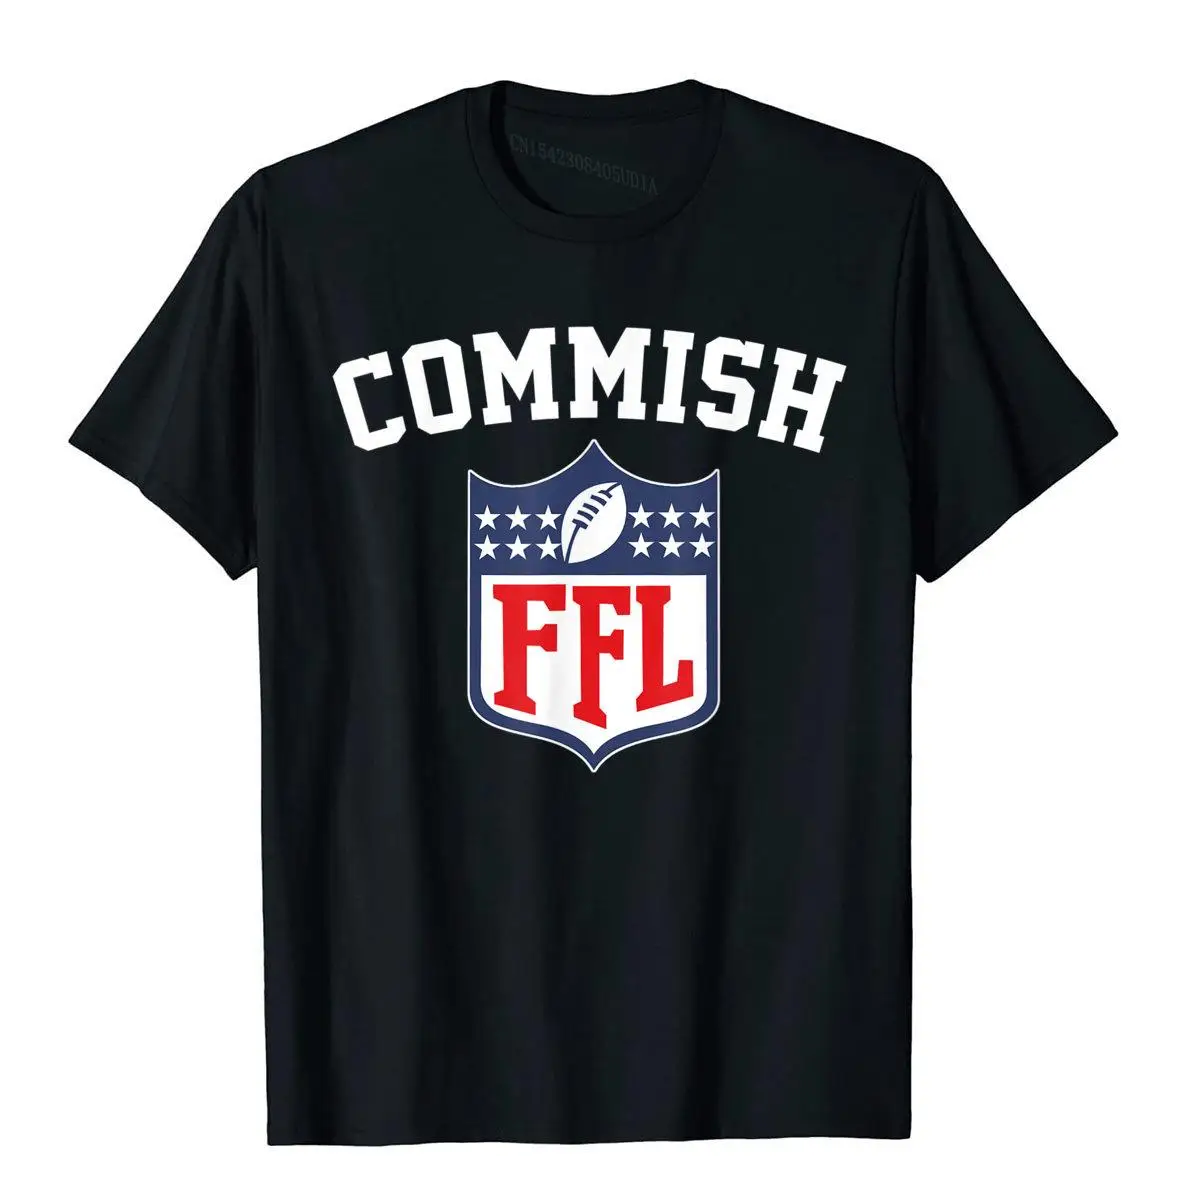 

The Commish Funny Fantasy Football League FFL Commish T-Shirt Summer Cotton Mens Tops & Tees Birthday Prevailing T Shirt